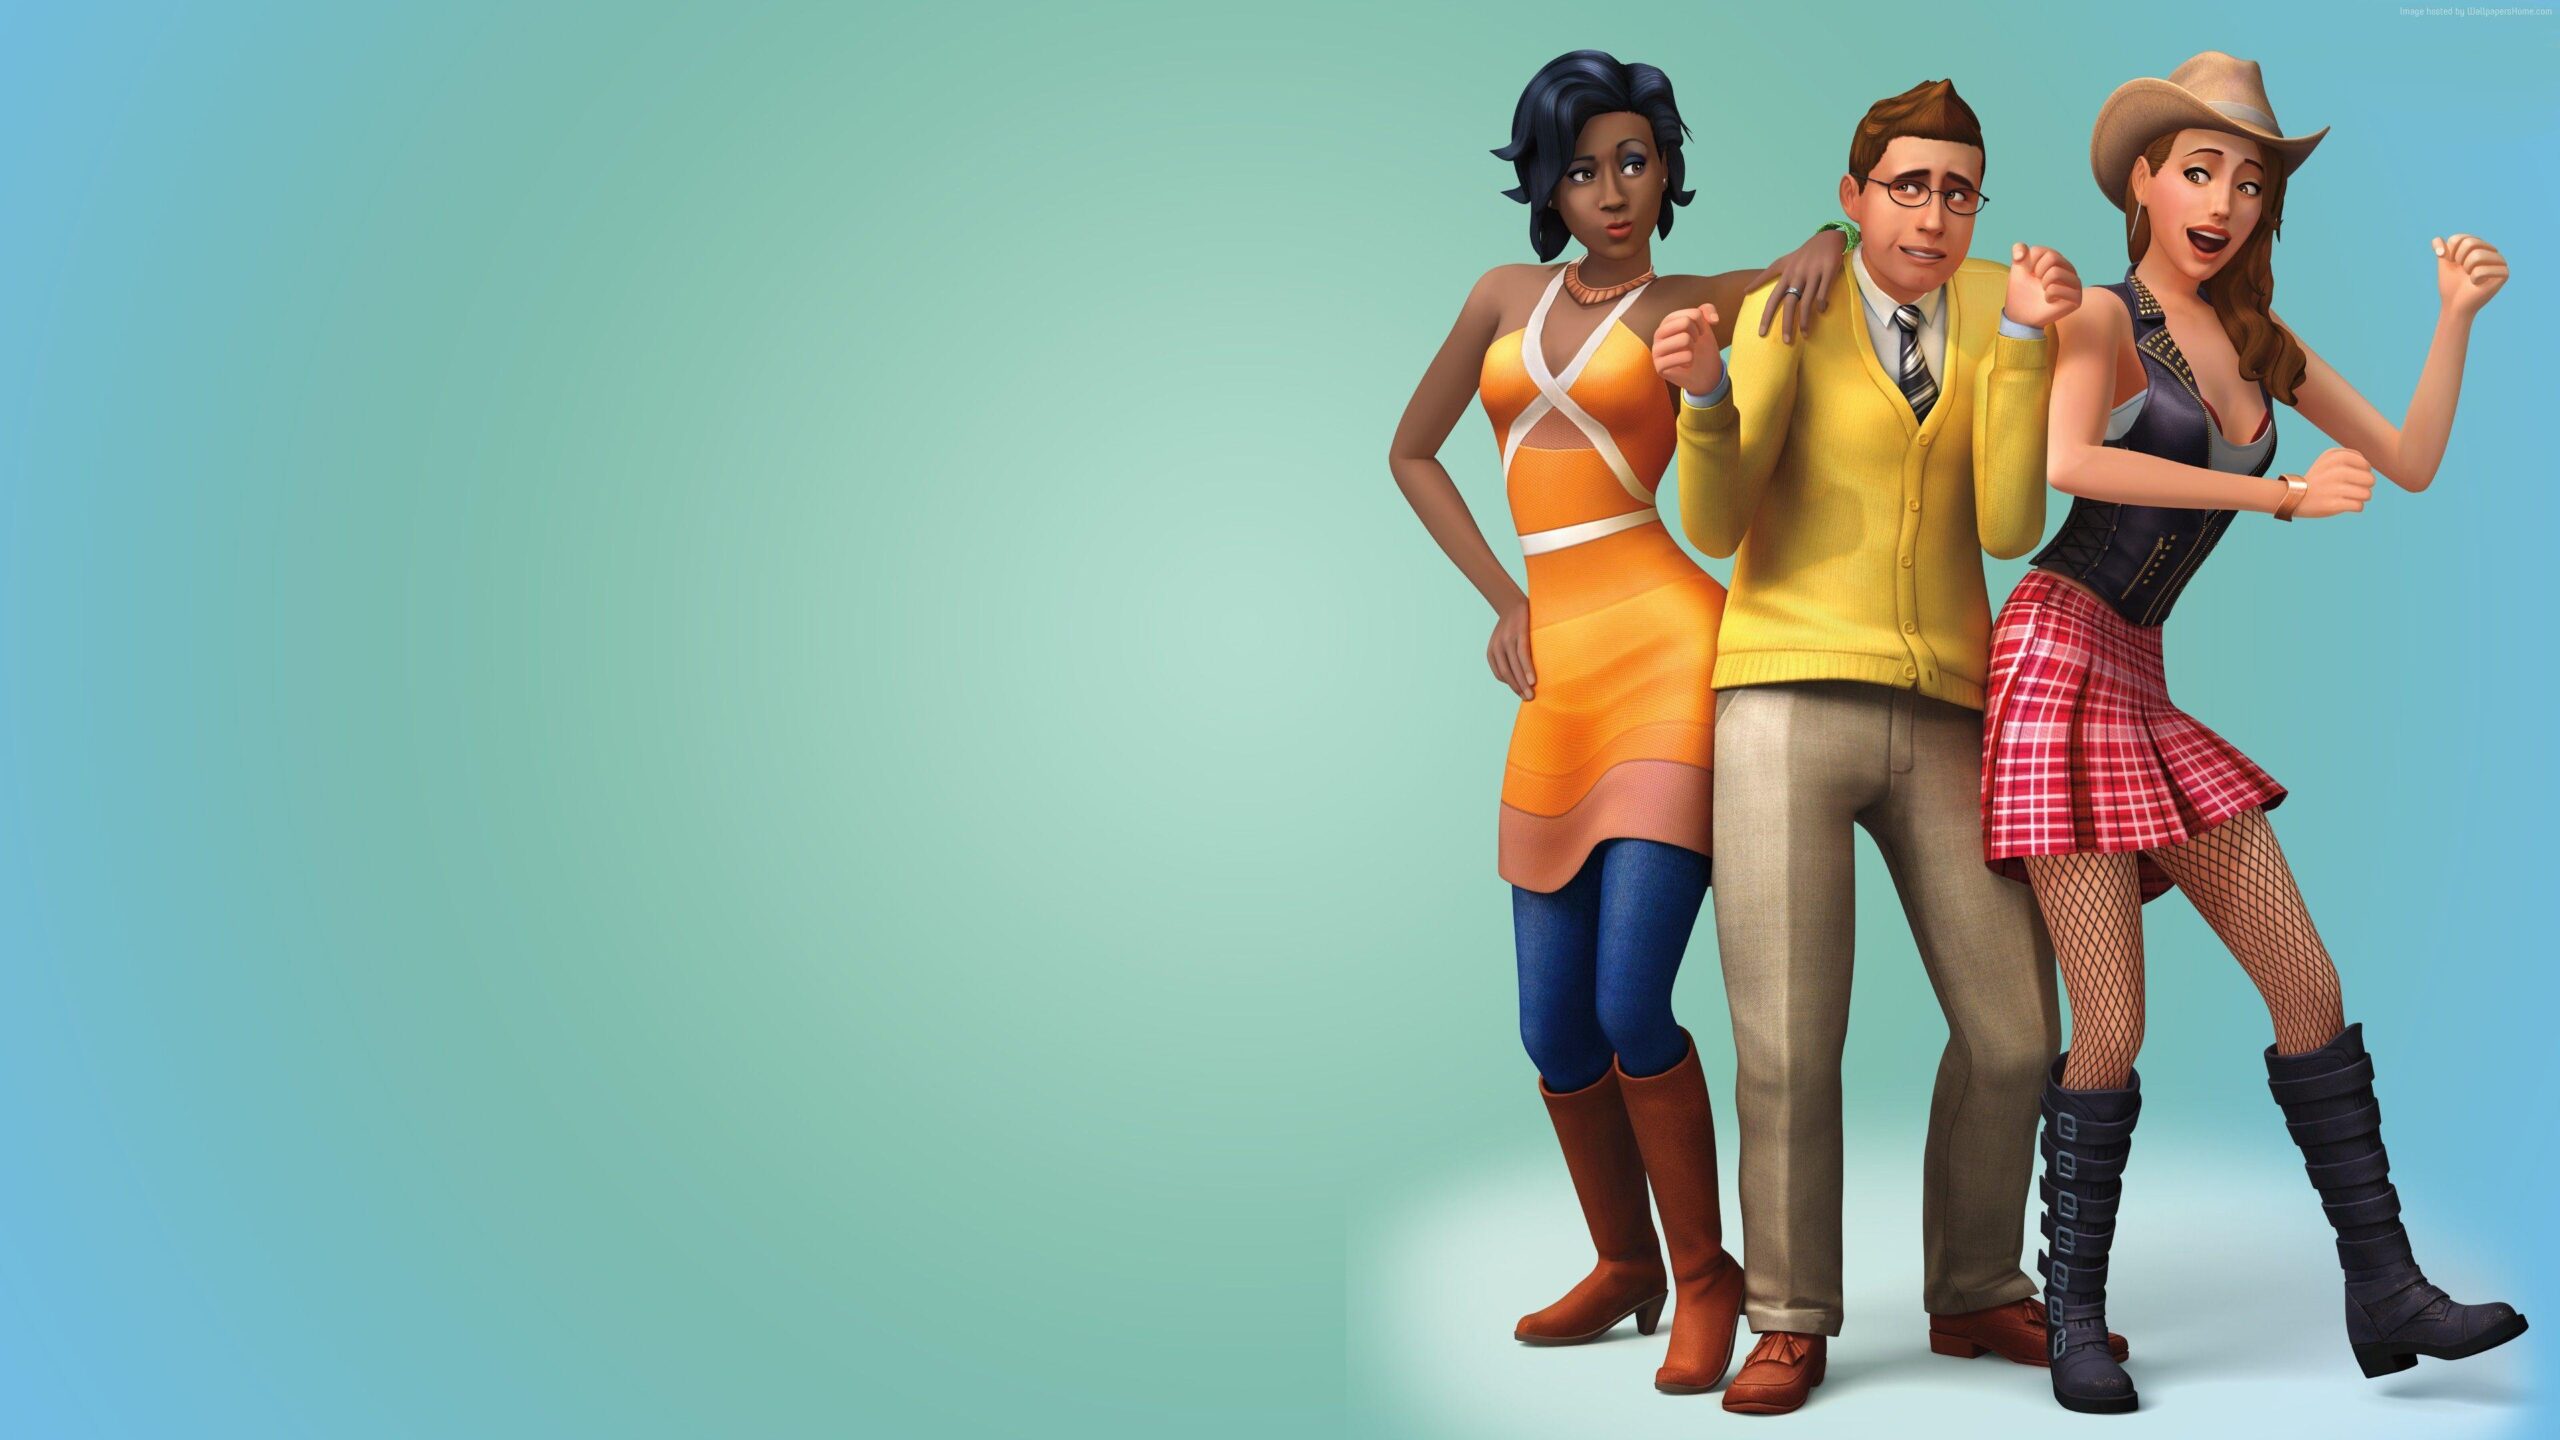 The Sims Get to Work Wallpaper, Games The Sims Get to Work